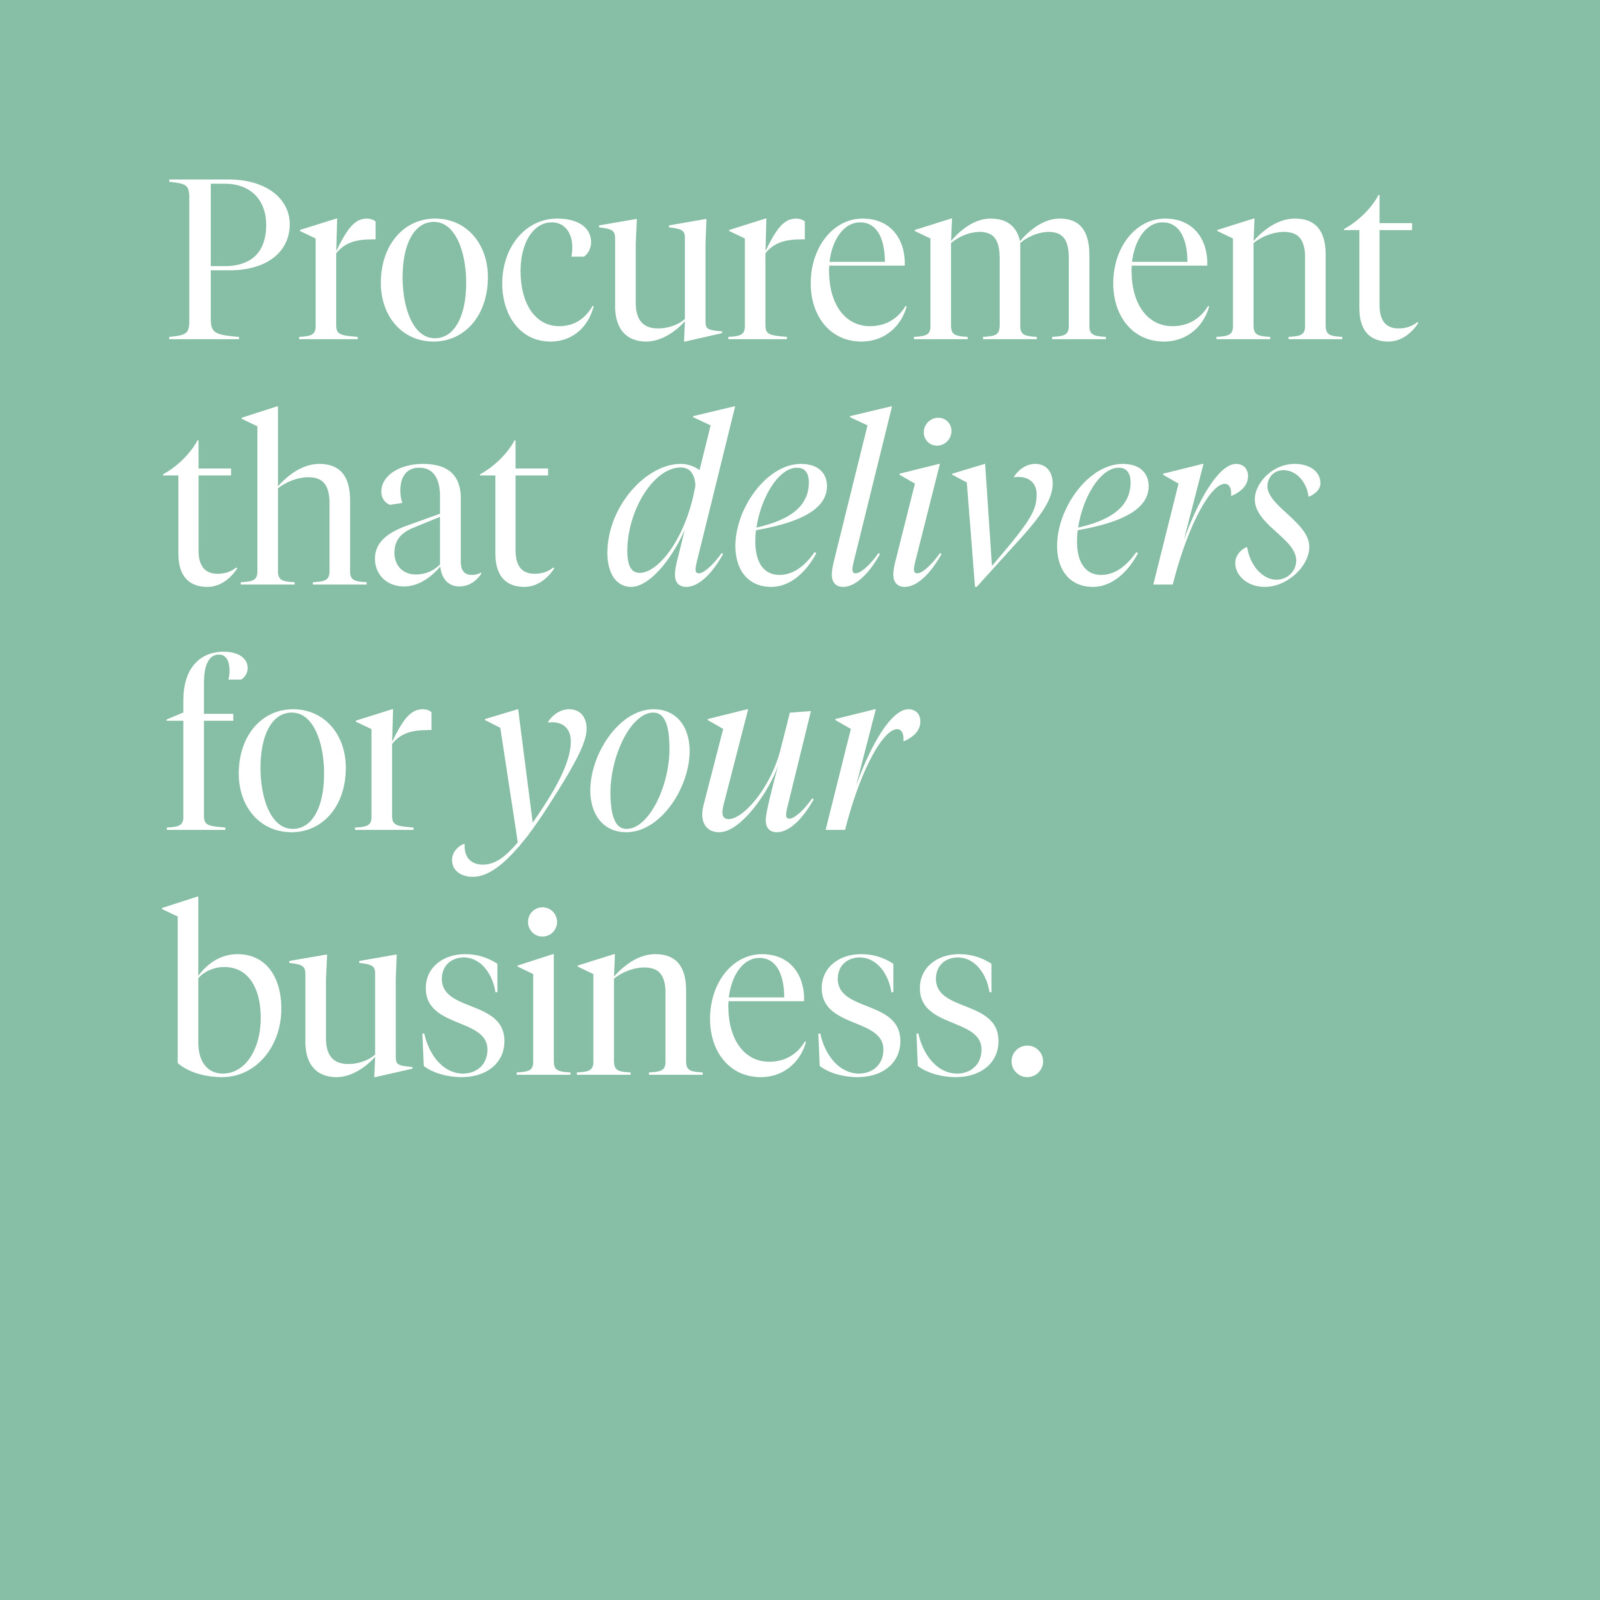 Procurement that delivers for your business